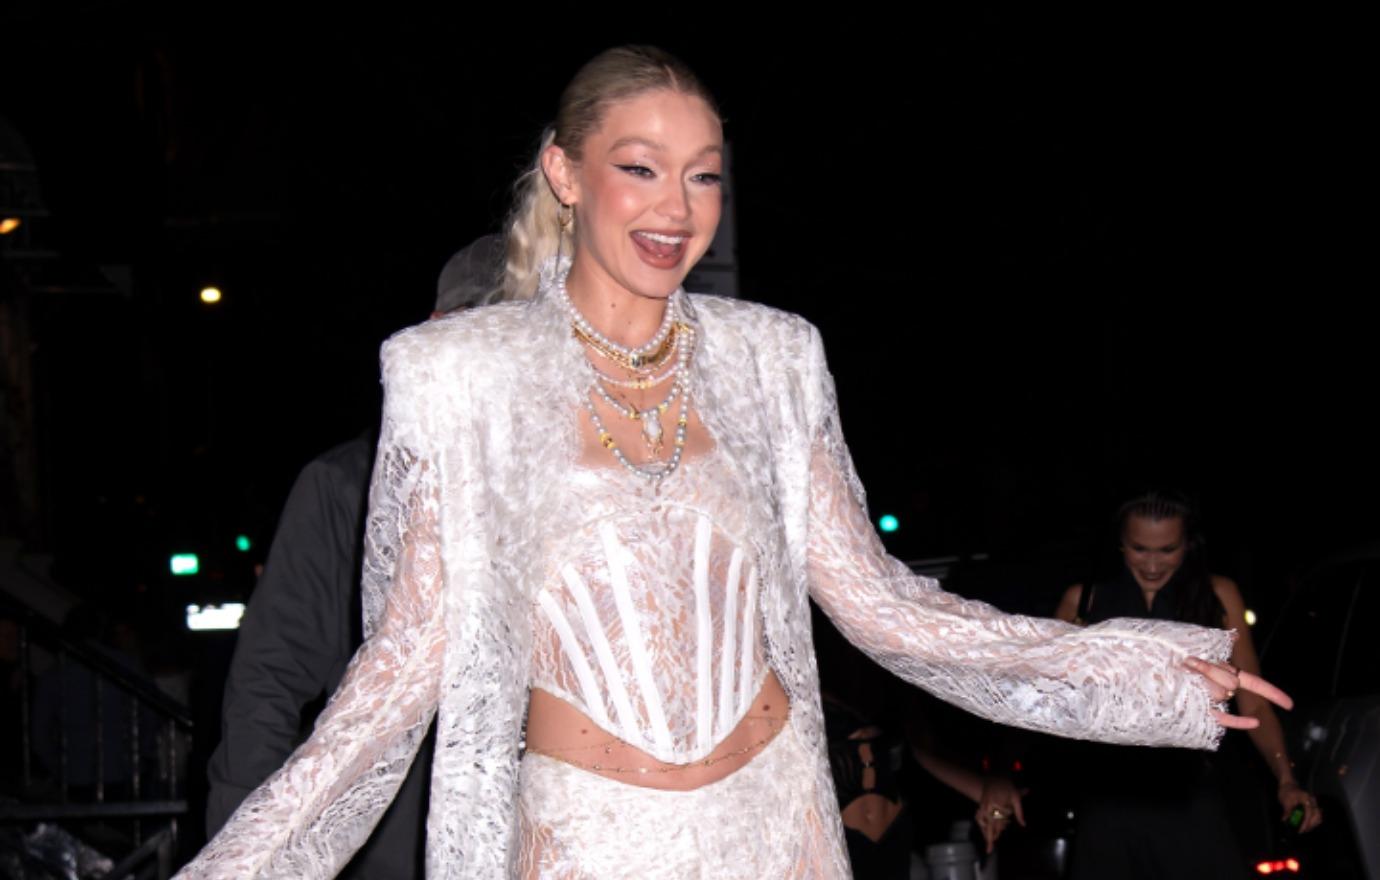 Gigi Hadid flashes confident smile as she leaves NYC party with one of  Leonardo DiCaprio's pals